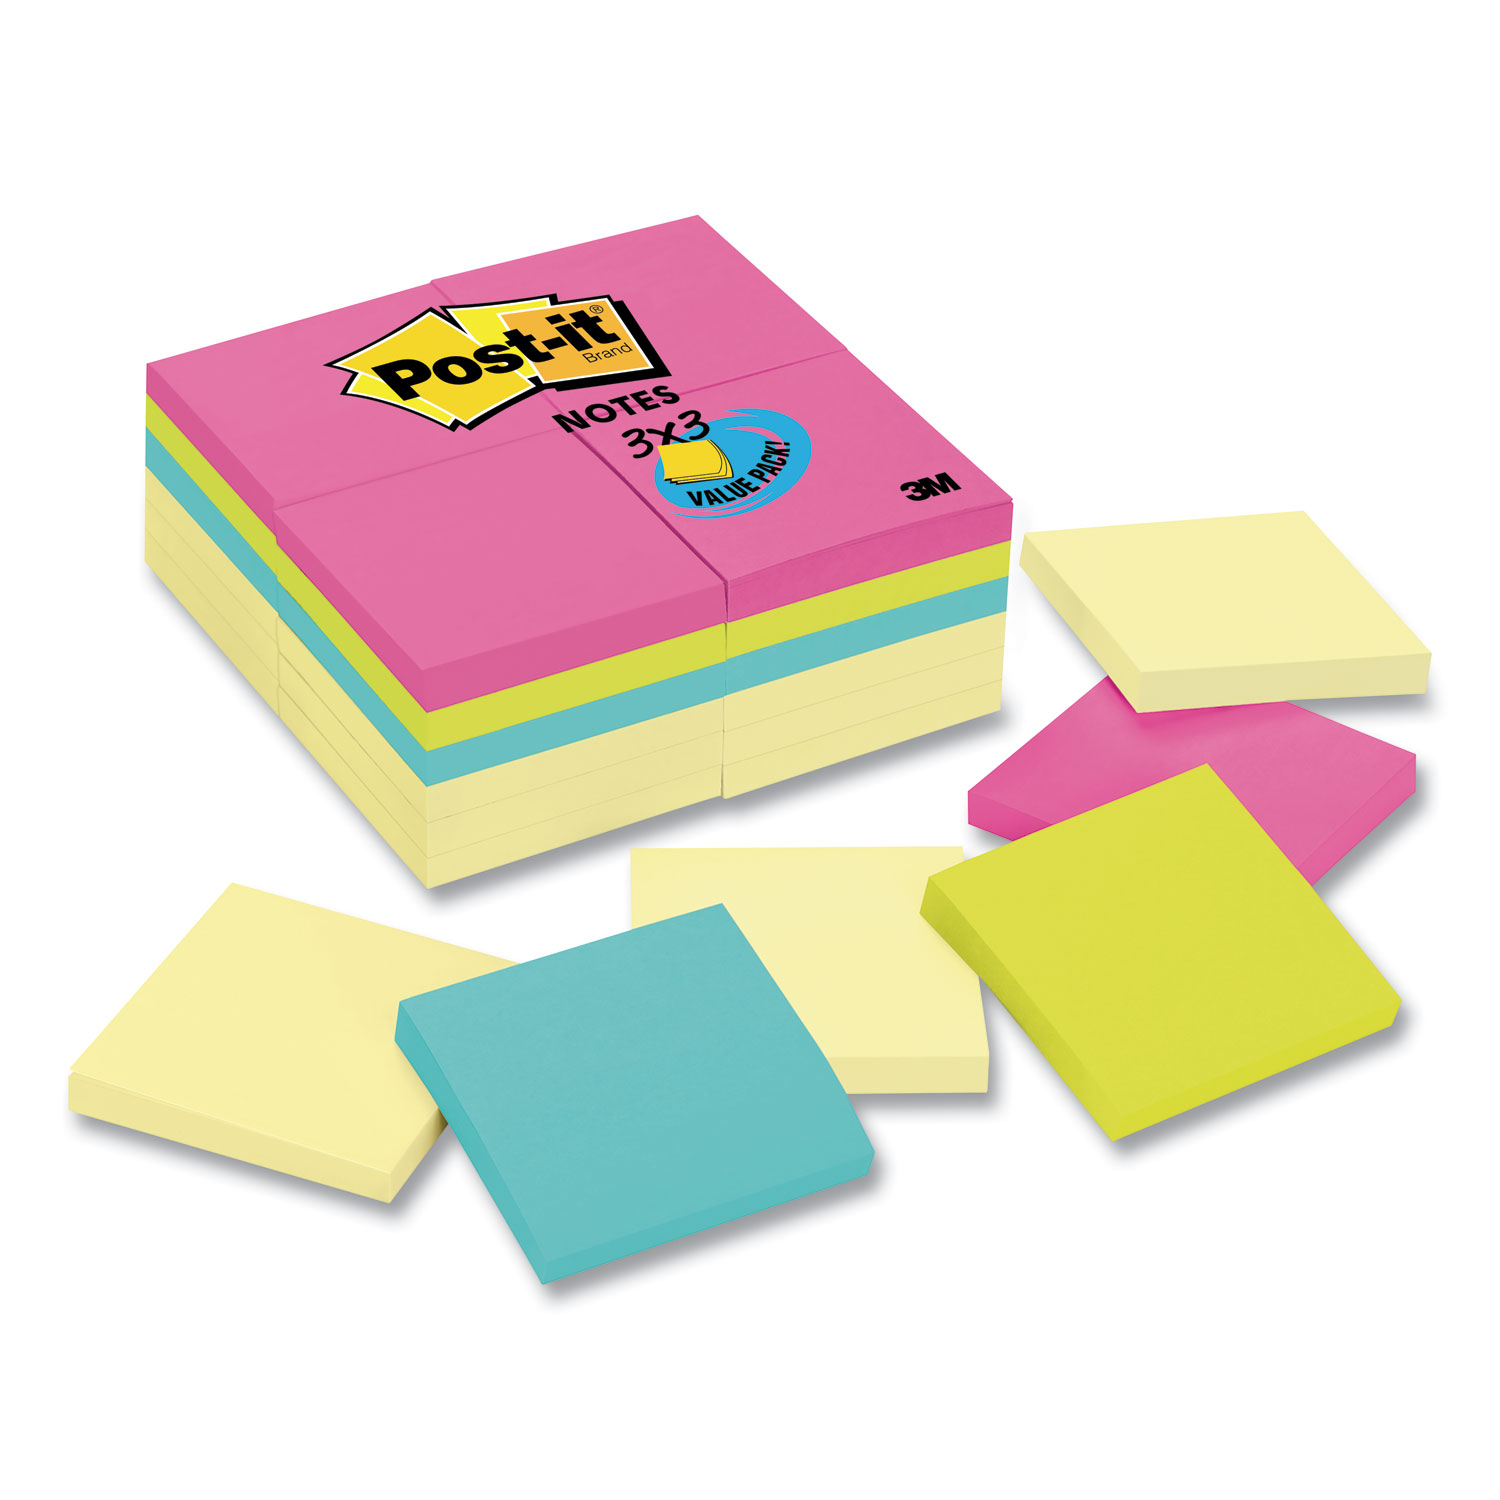  Post-it Notes 654-CYP-24VA Original Pads Value Pack, 3 x 3, Canary Yellow/Cape Town, 100-Sheet, 24 Pads (MMM654CYP24VA) 